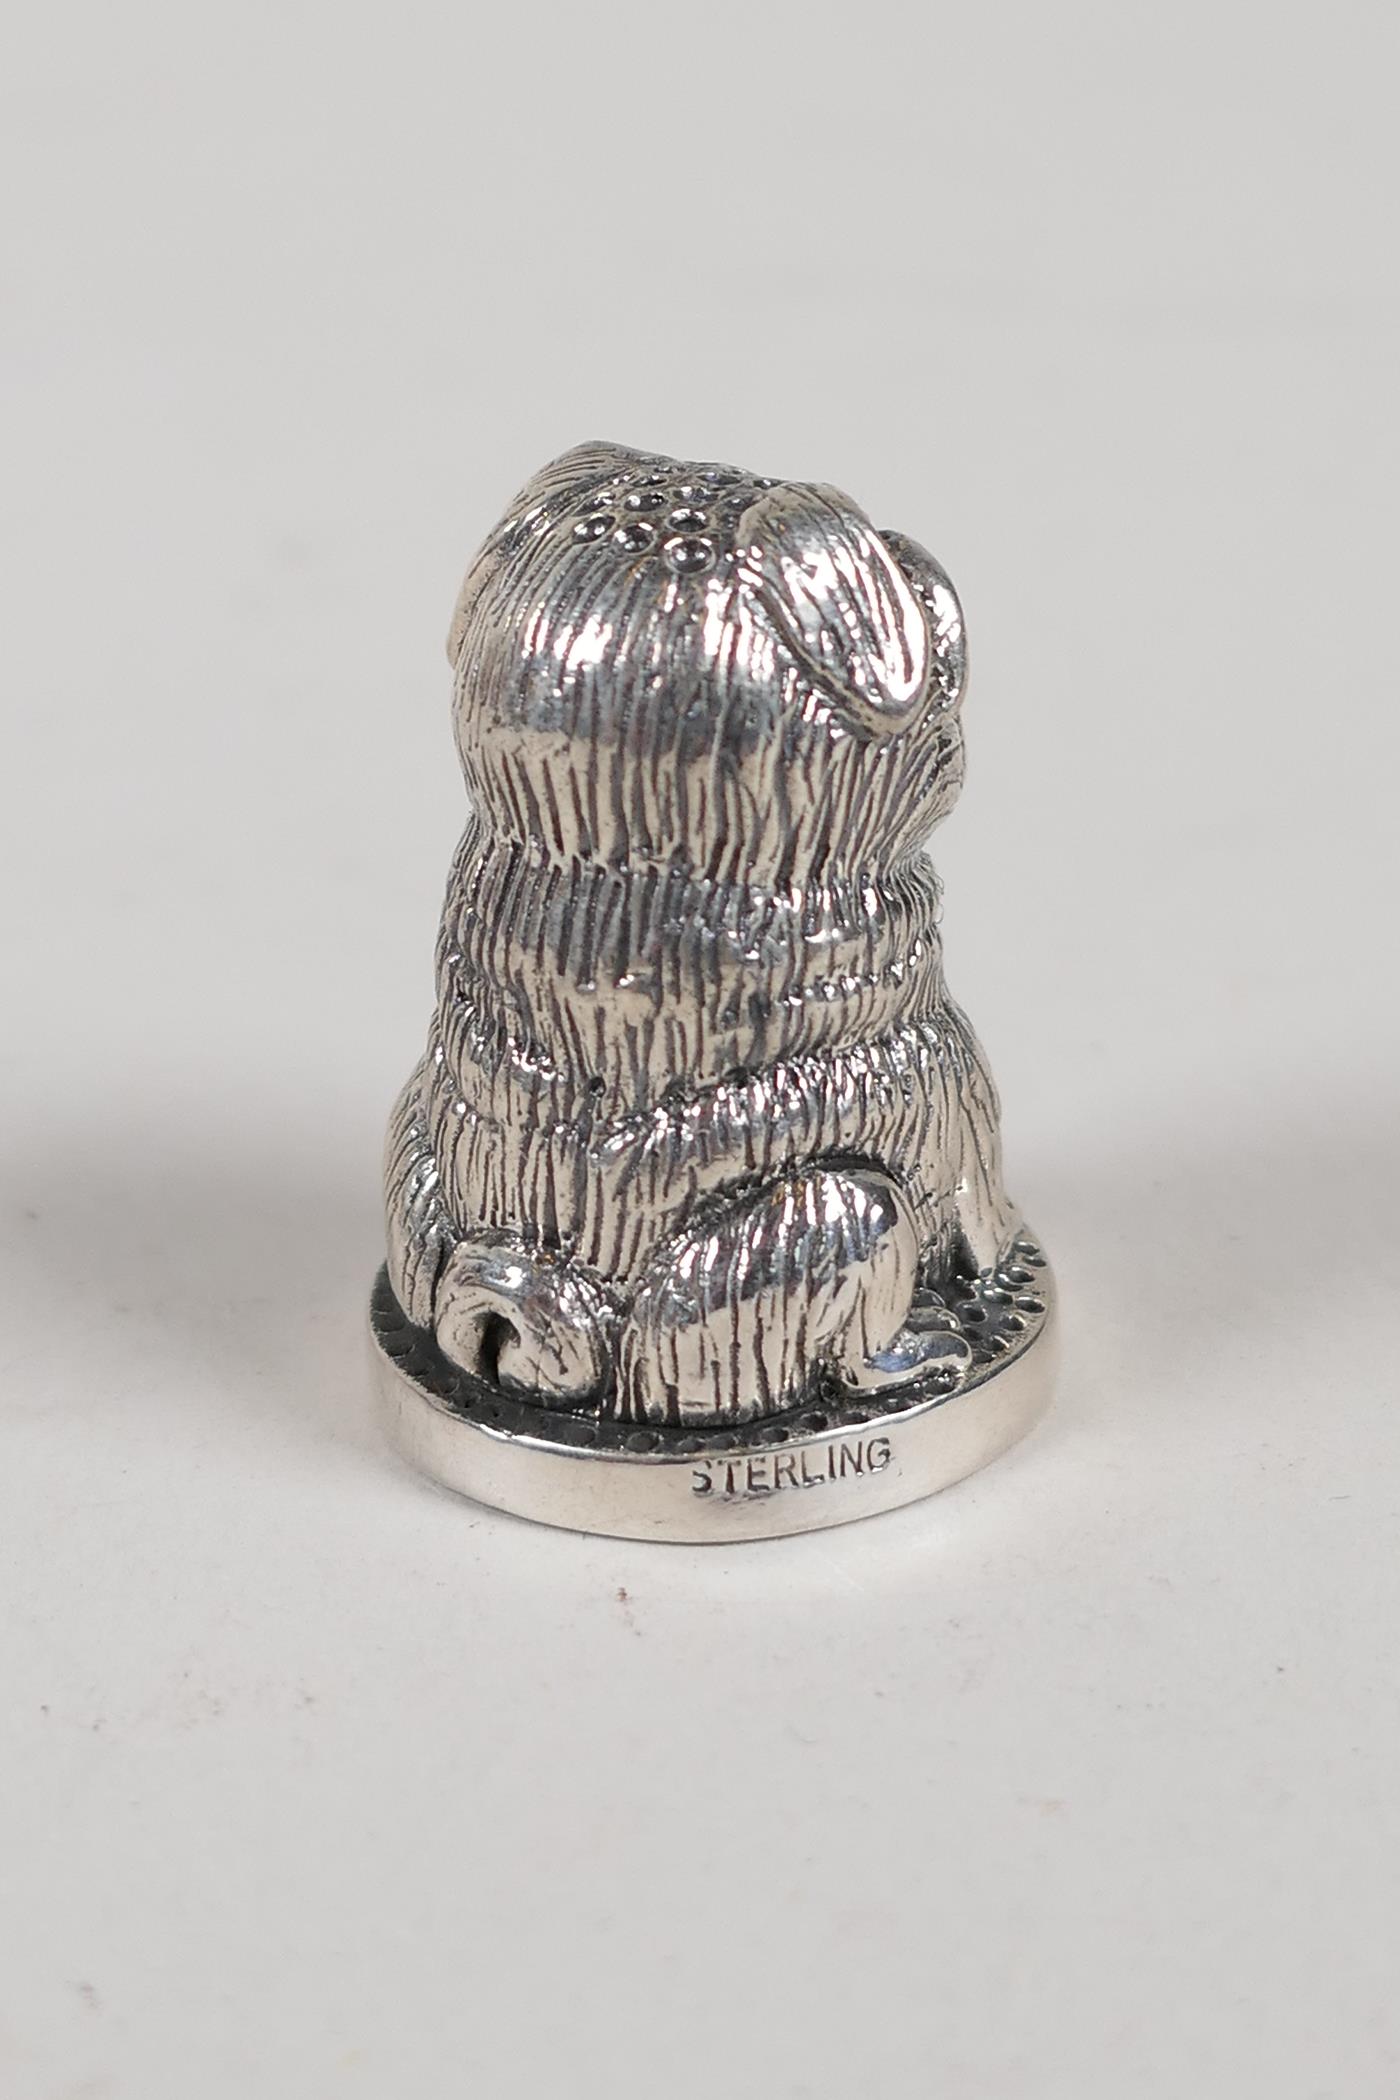 A sterling silver thimble in the form of a pug dog, 1" high - Image 3 of 3